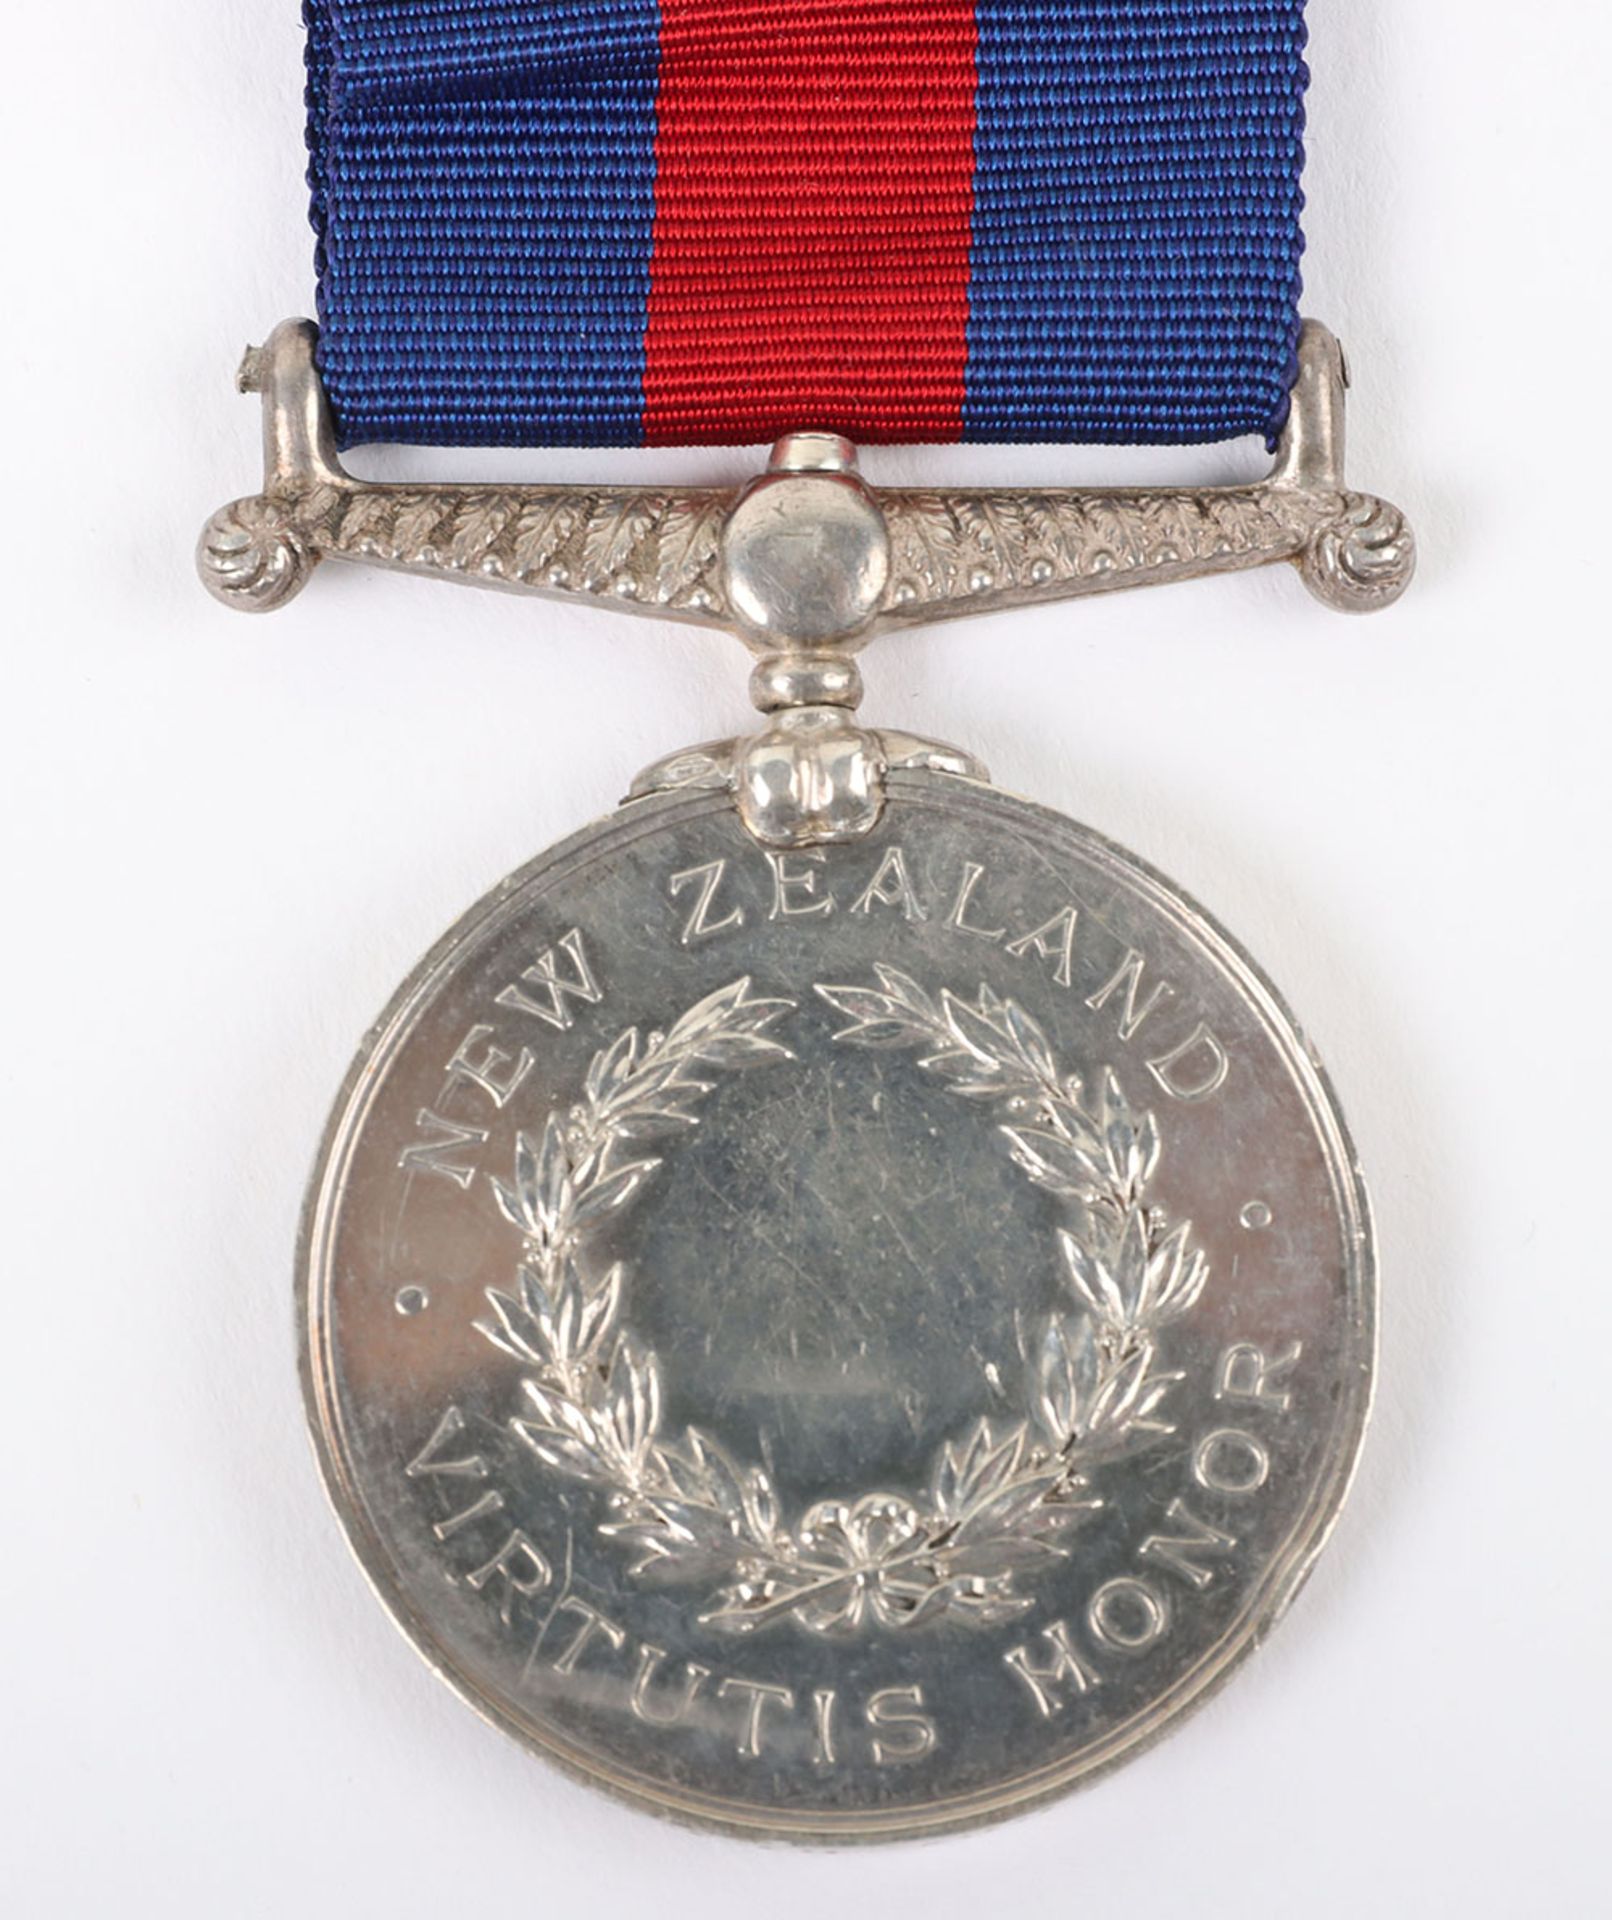 Victorian New Zealand 1845-66 Medal to the 43rd Regiment of Foot with Original Documentation - Image 3 of 5